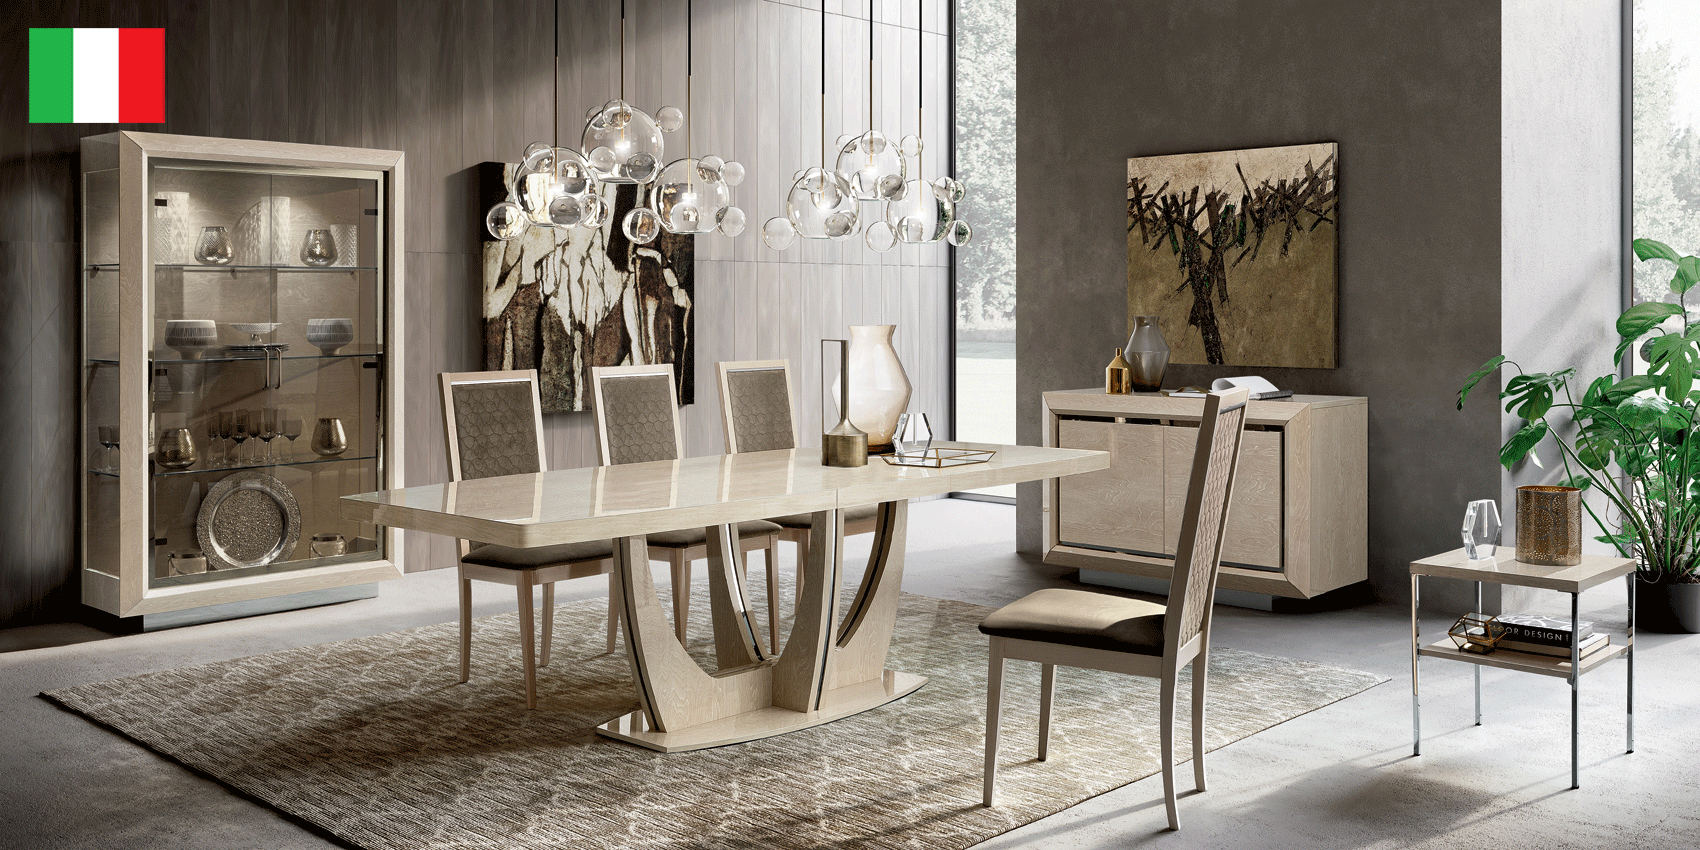 Brands Unico Tables and Chairs, Italy Elite Dining Ivory with Ambra “Rombi” Chairs